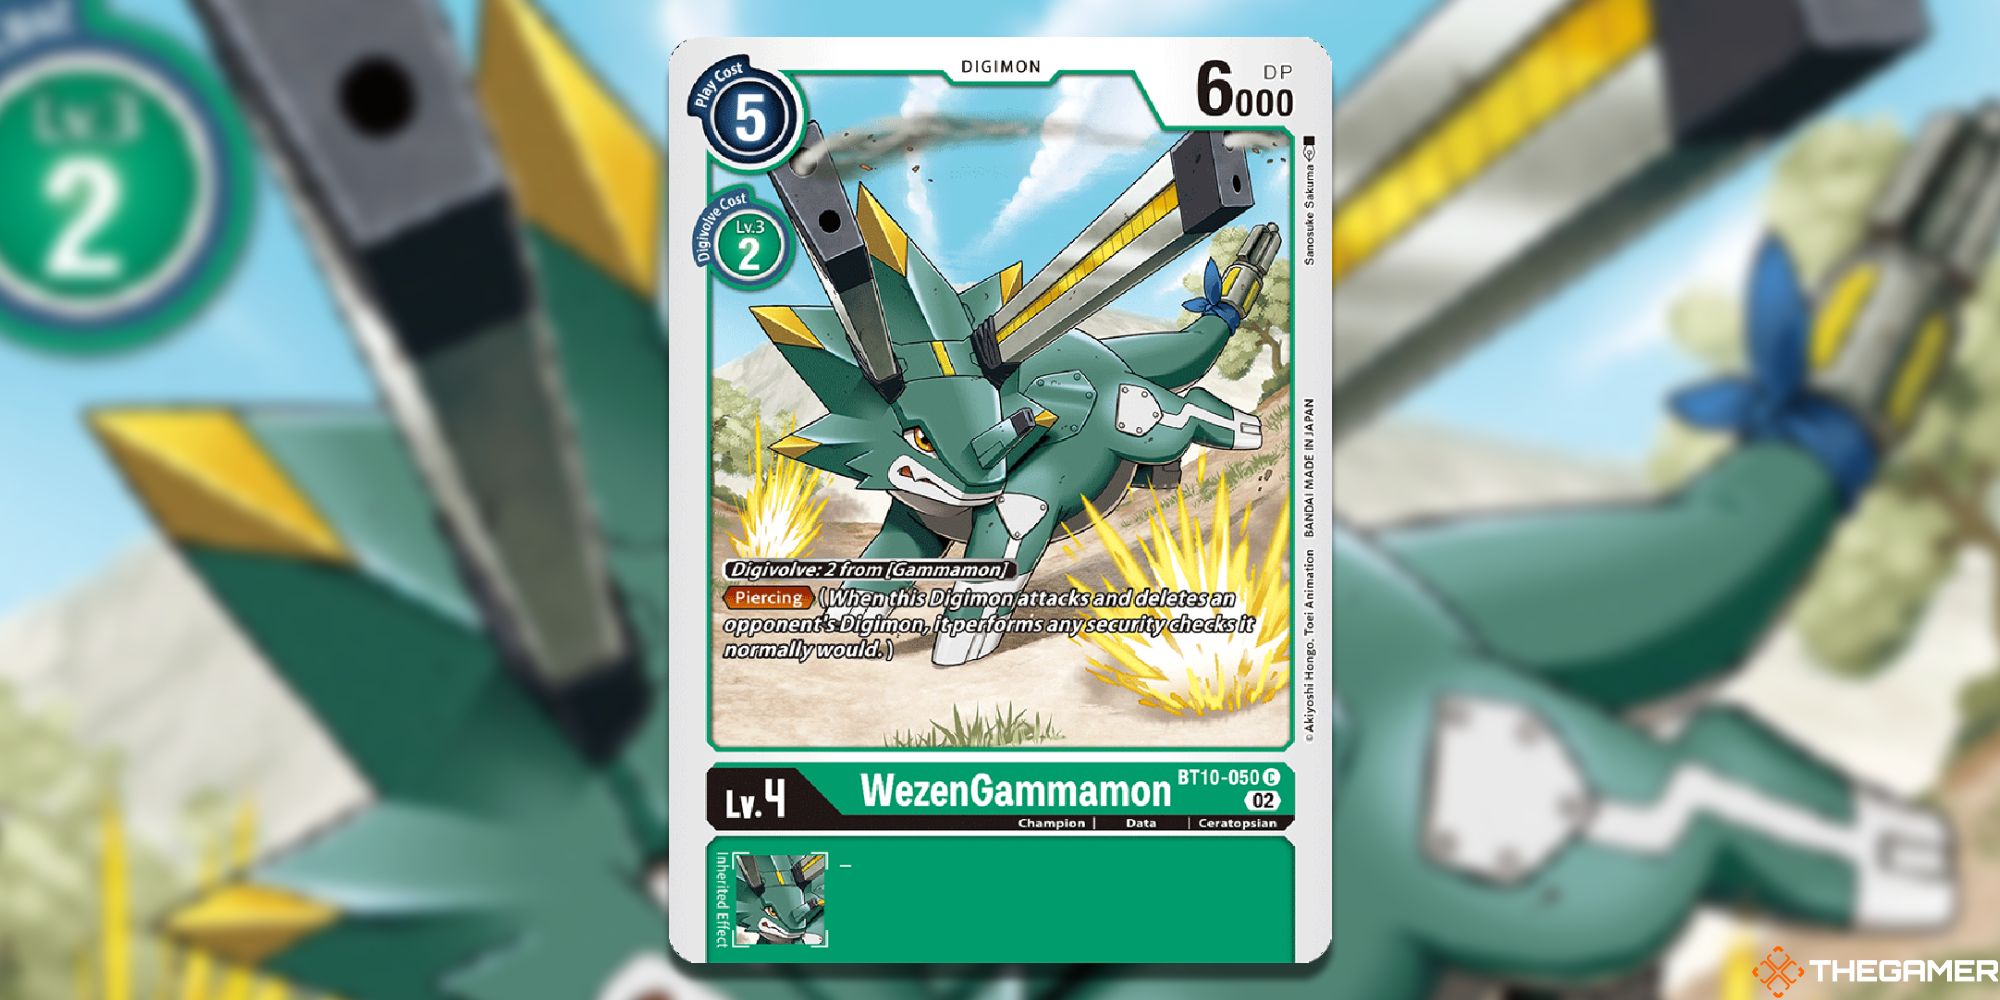 wezengammamon image with blurred background digimon card game